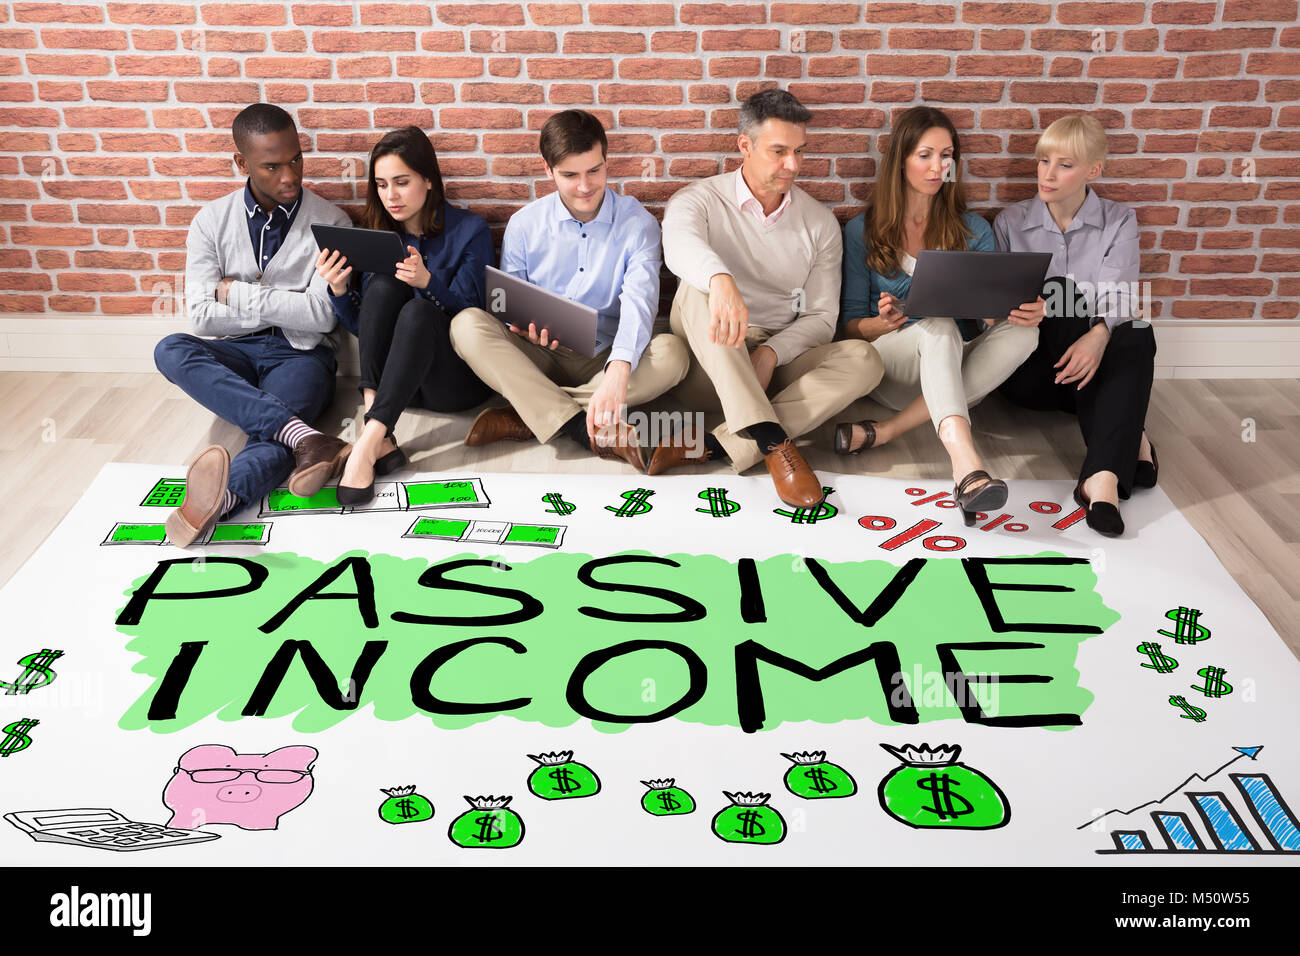 Group Of People Looking AT Passive Income Text On Floor Stock Photo